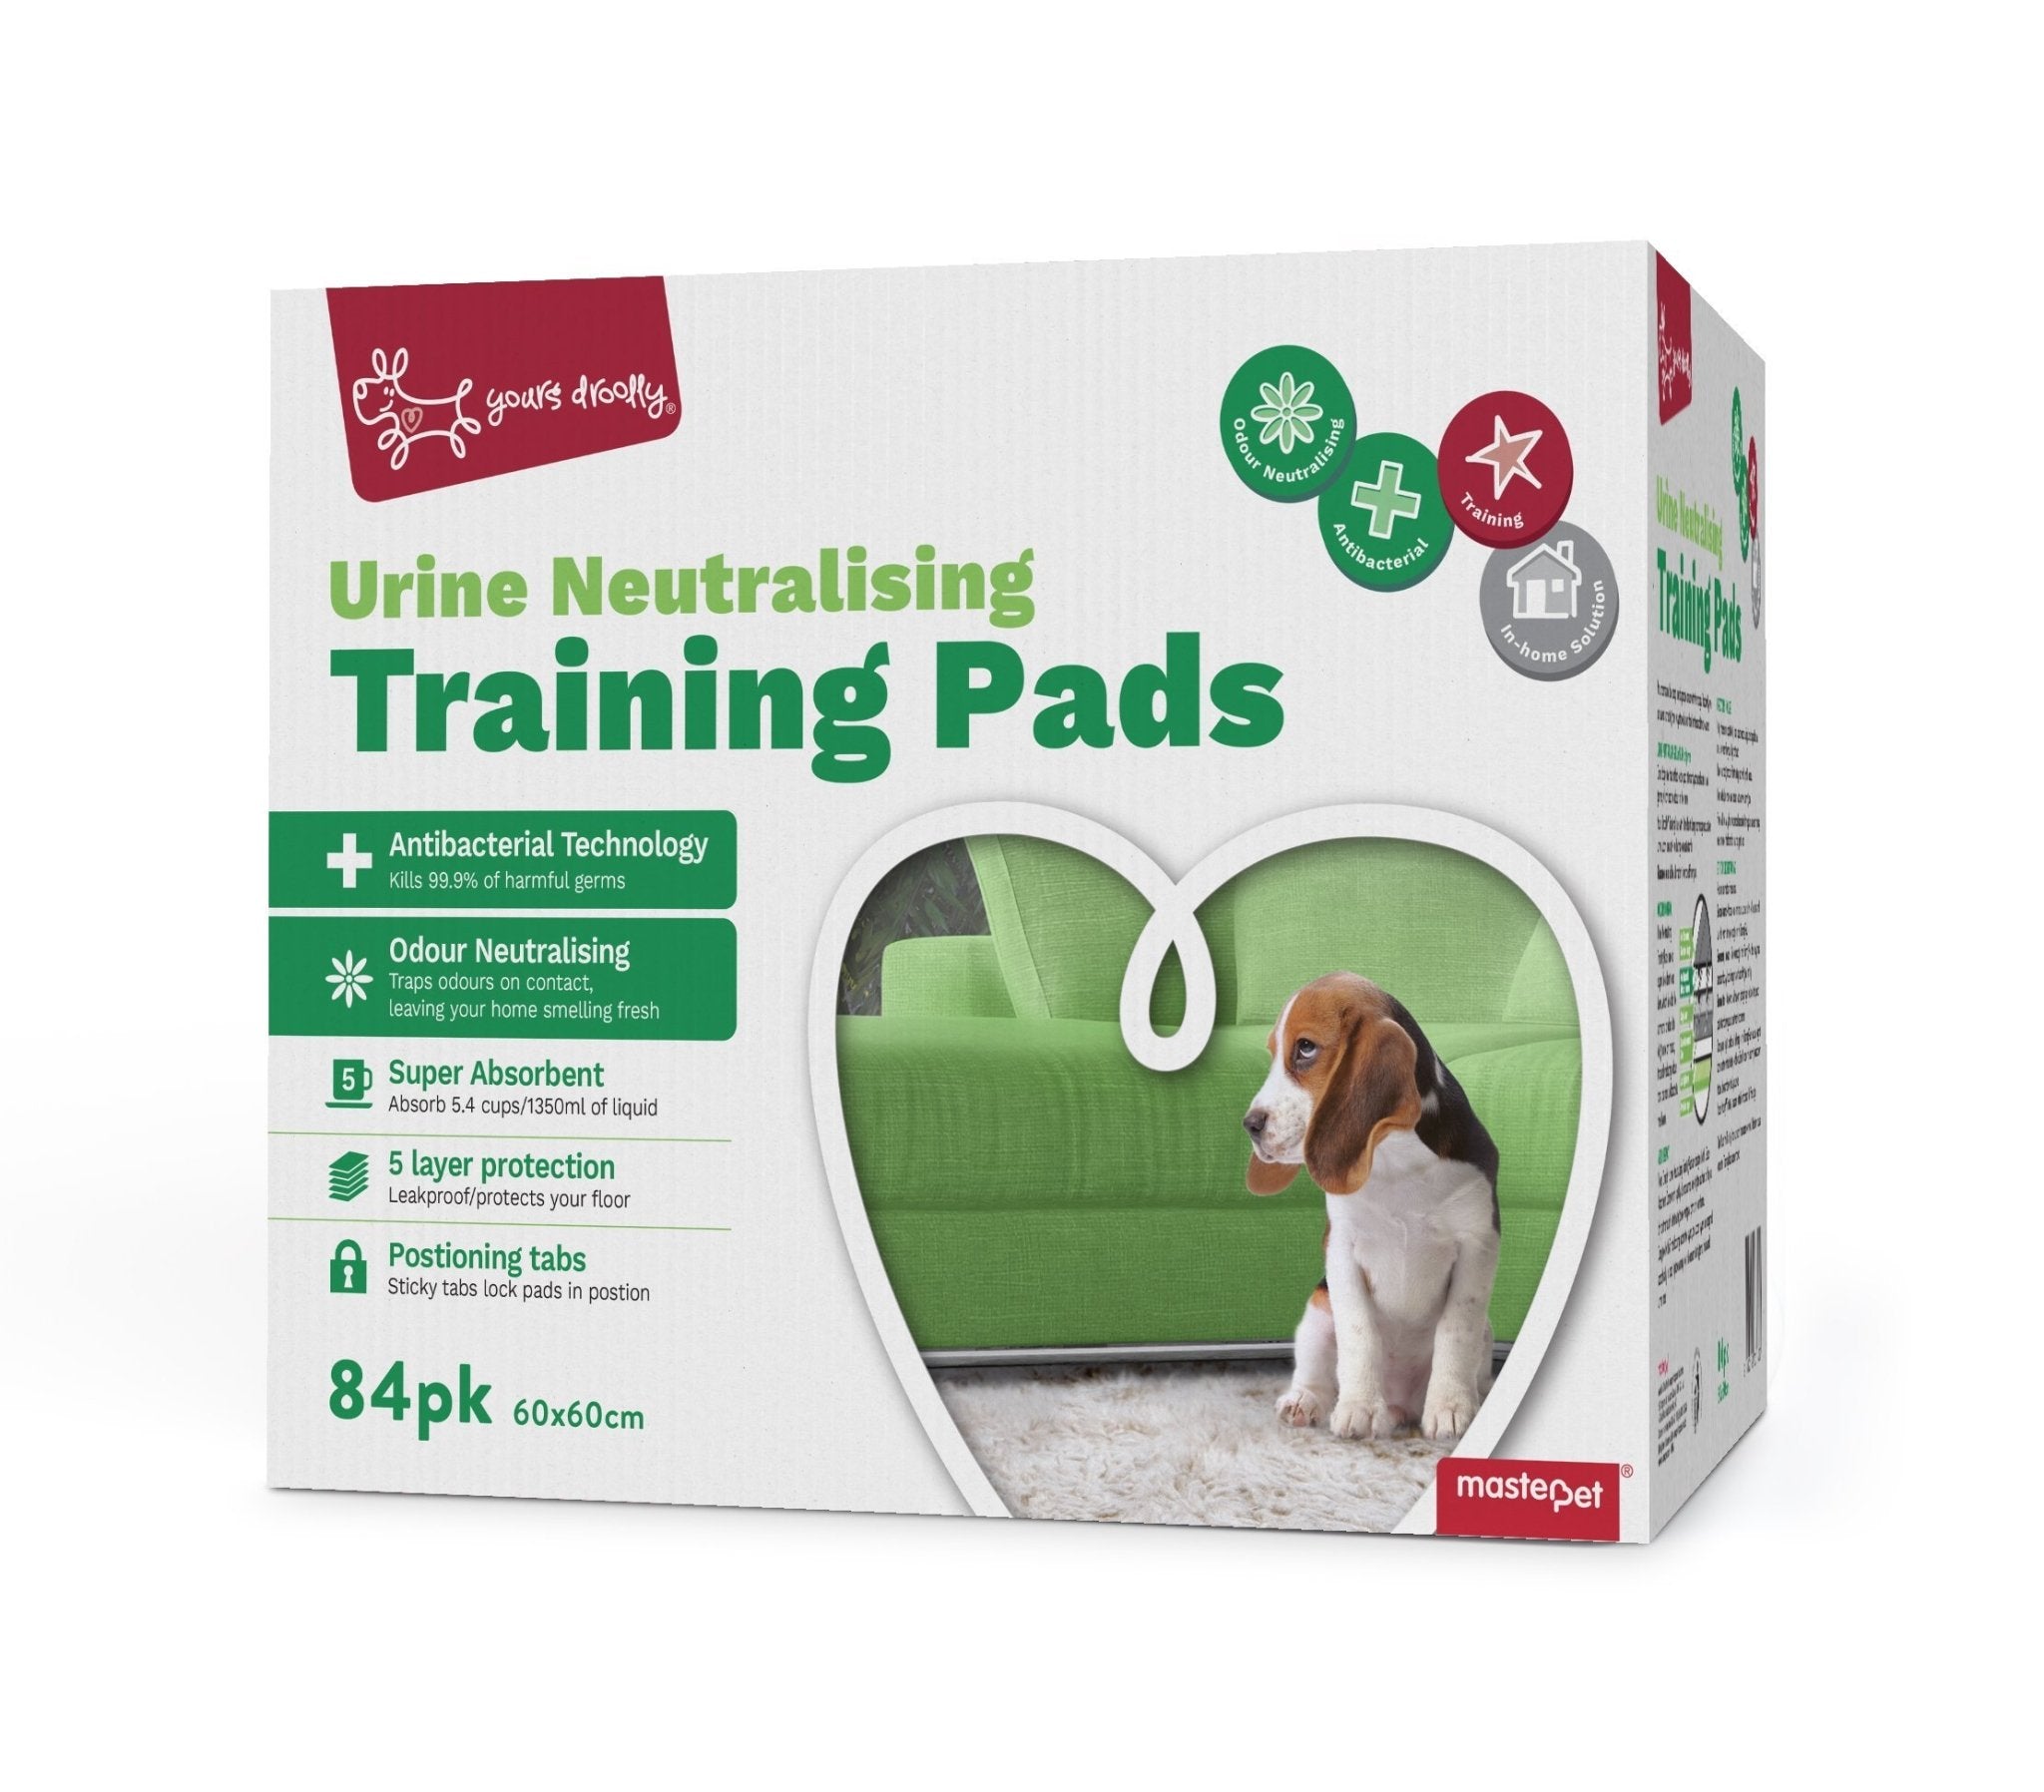 Yours Droolly Urine Neutralising Pad